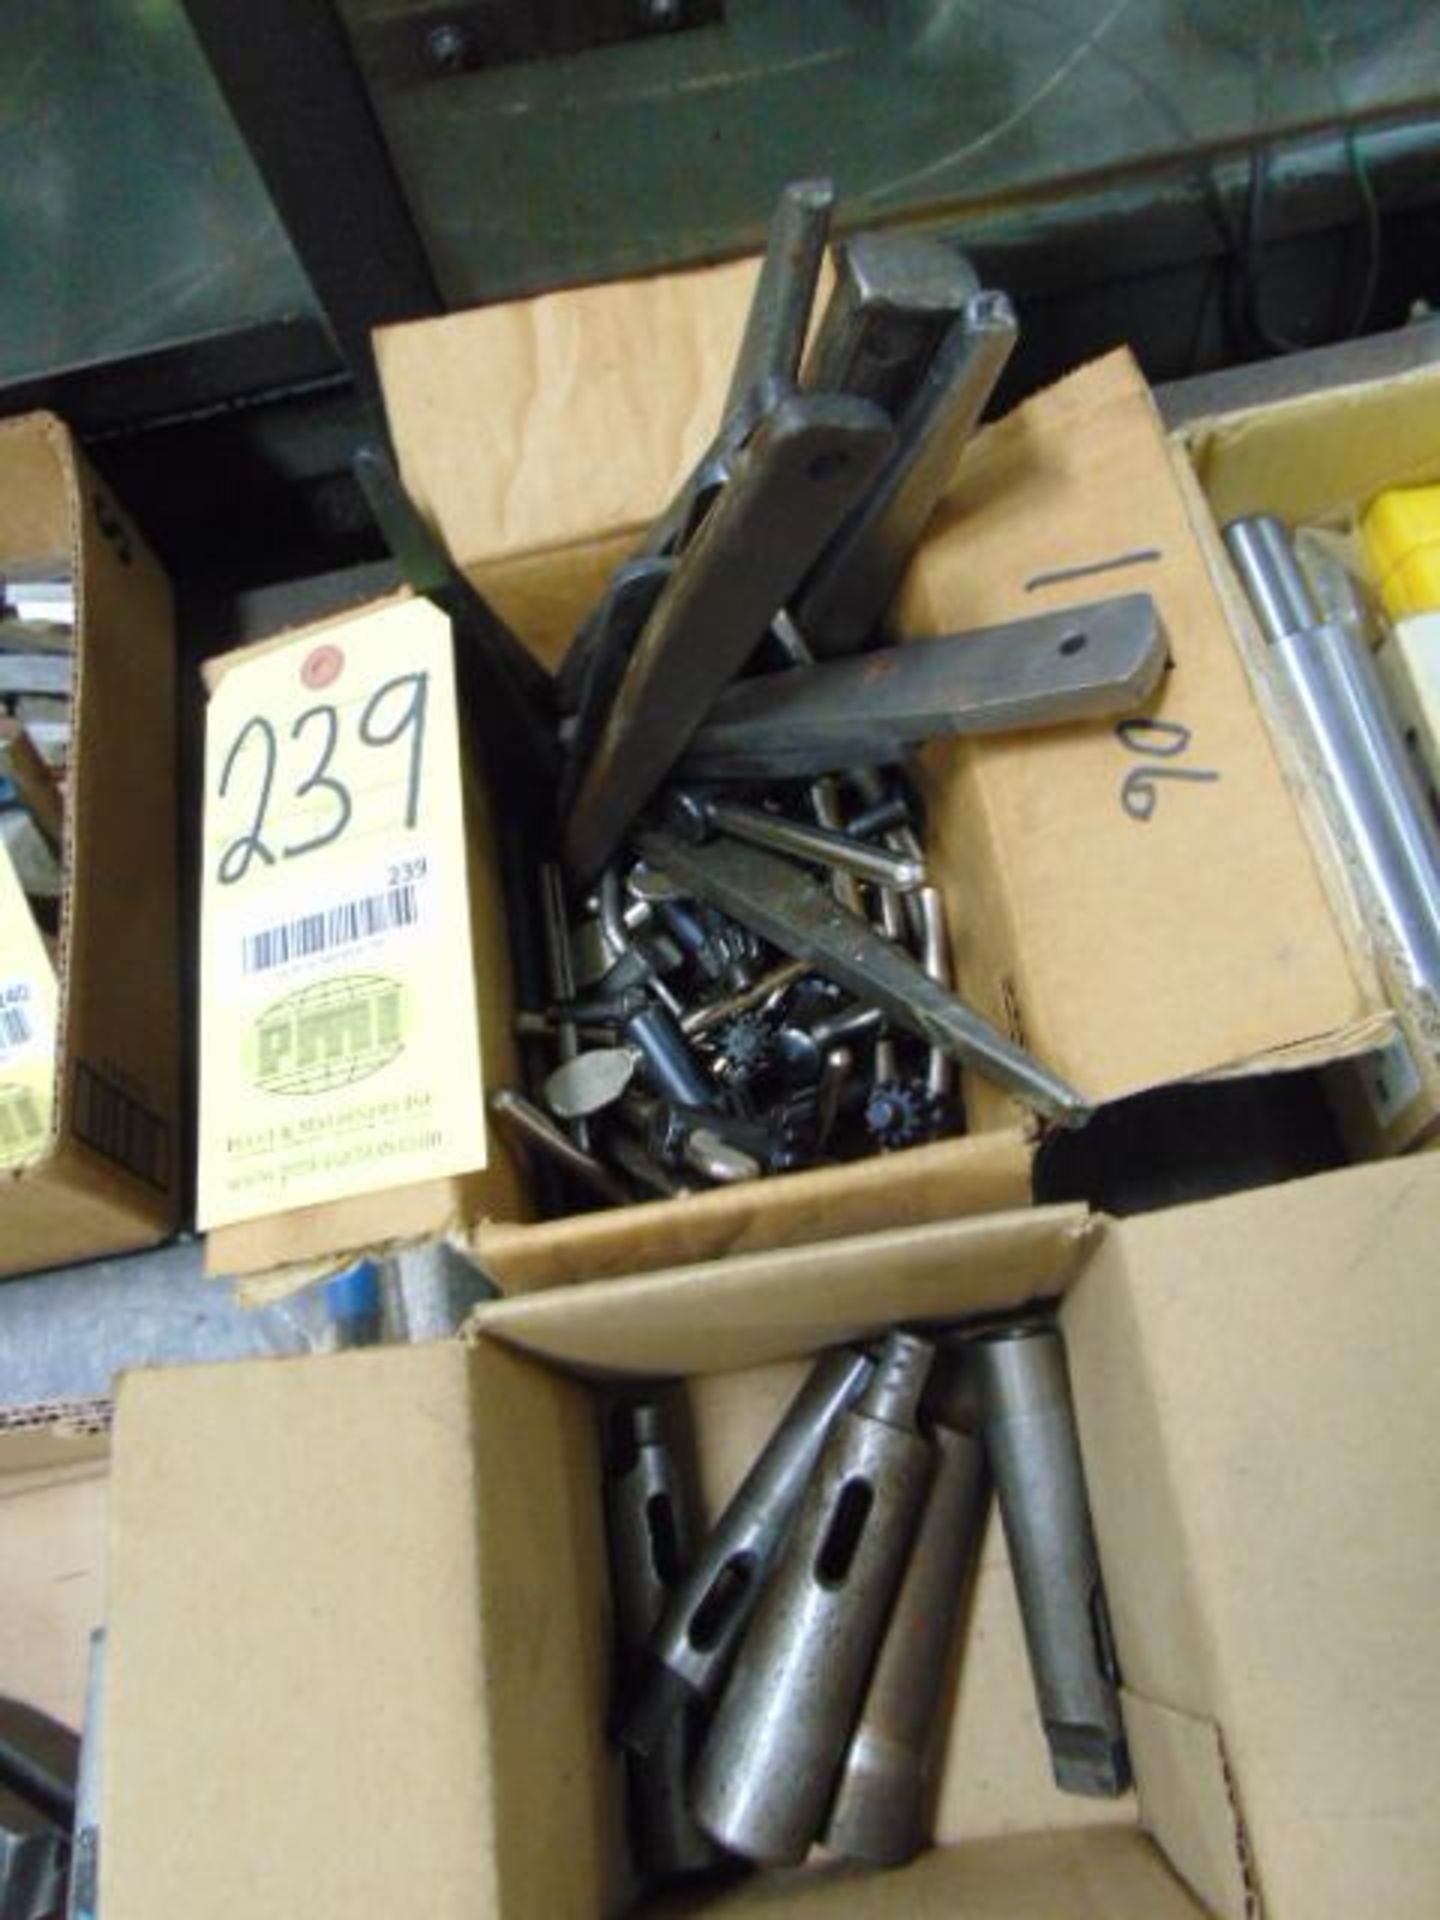 LOT OF CHUCK KEYS & DRILL SLEEVES, assorted (in two boxes)